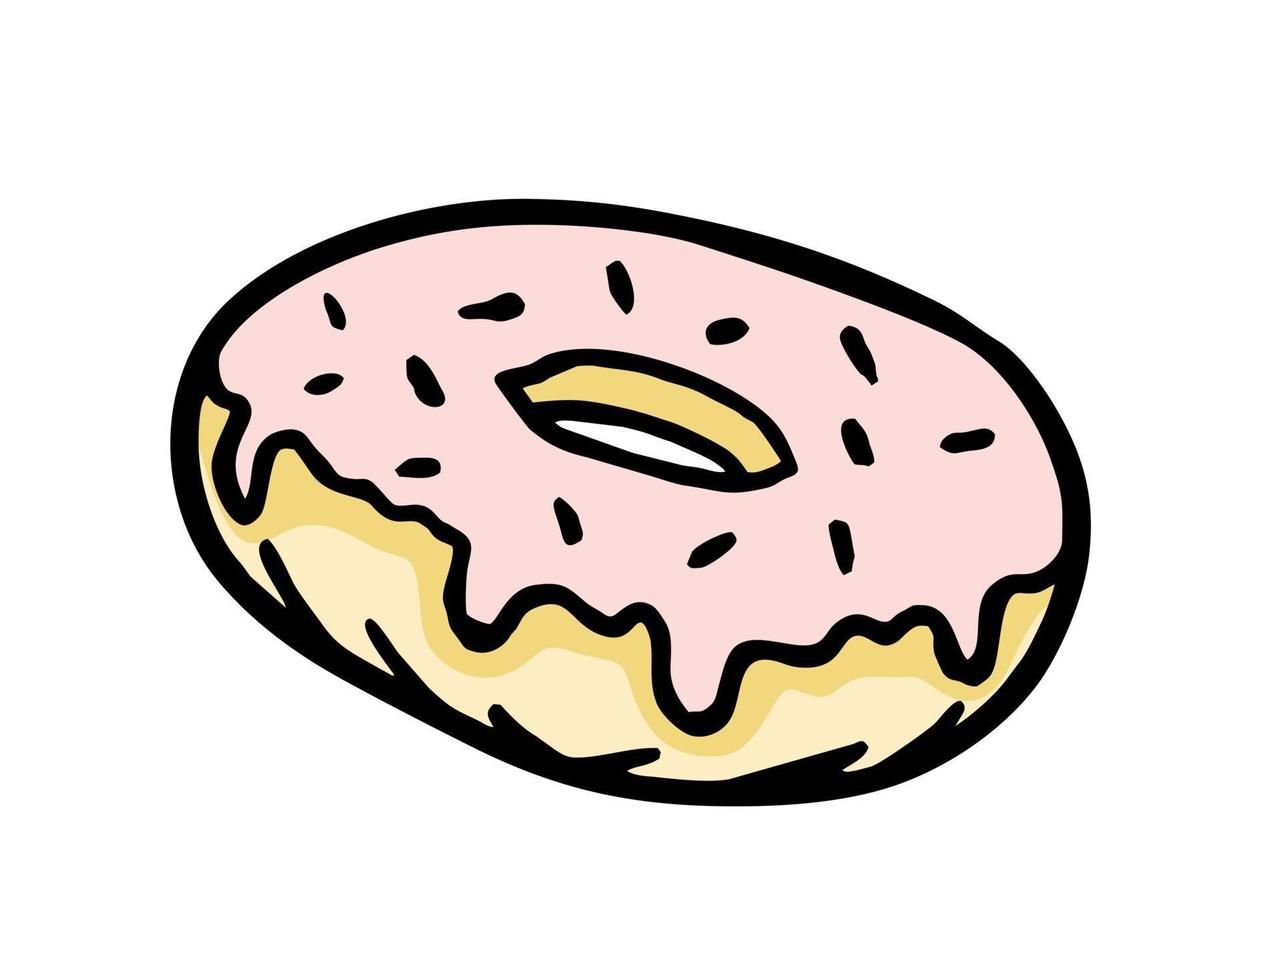 Donut is a hand-drawn bakery element Vector in the style of a doodle sketch. For cafe and bakery menus